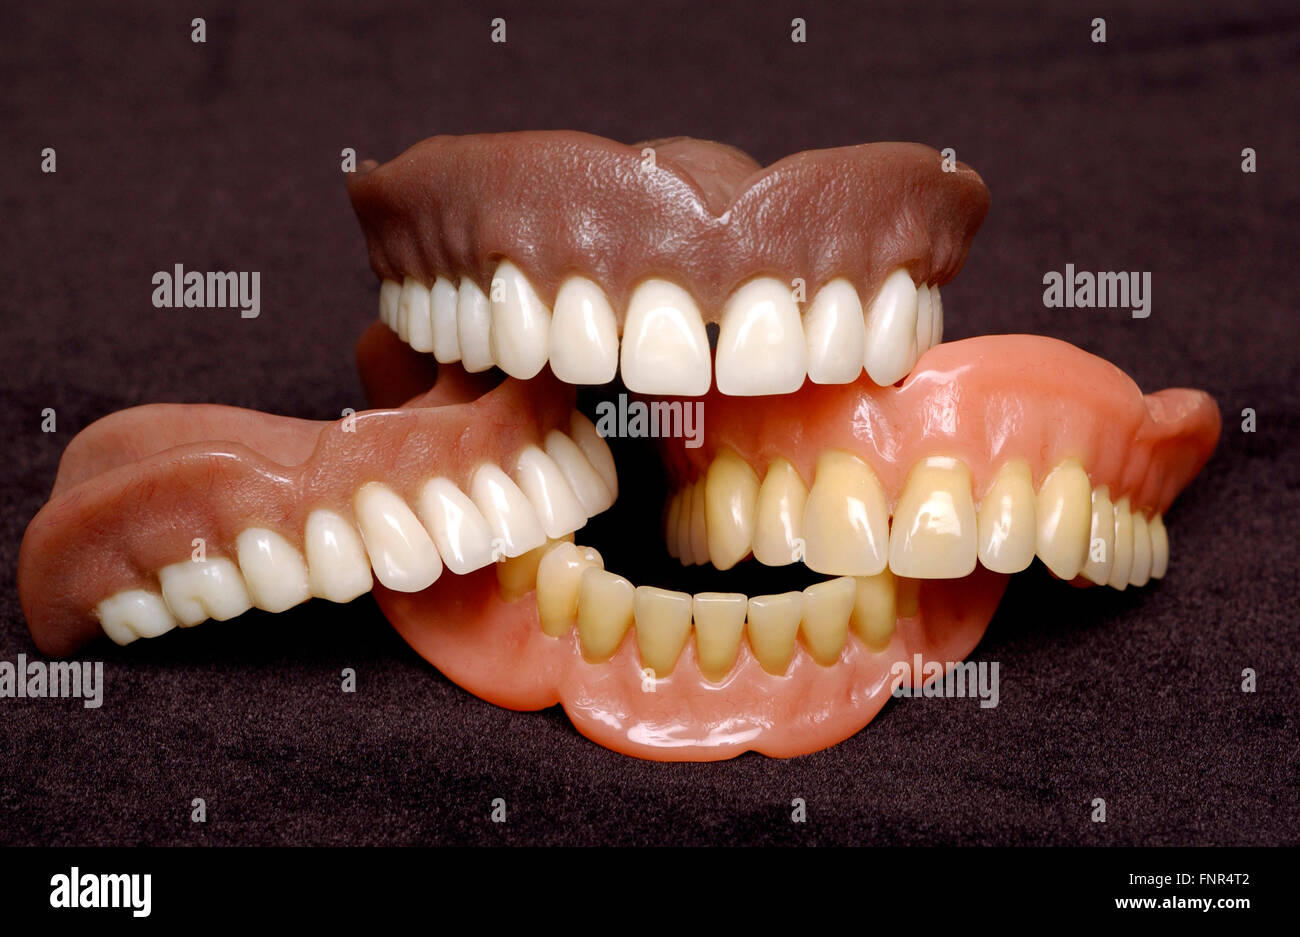 Two sets of full dentures. Dentures or false teeth are made from an acrylic base on which acrylic or ceramic teeth are mounted. Stock Photo